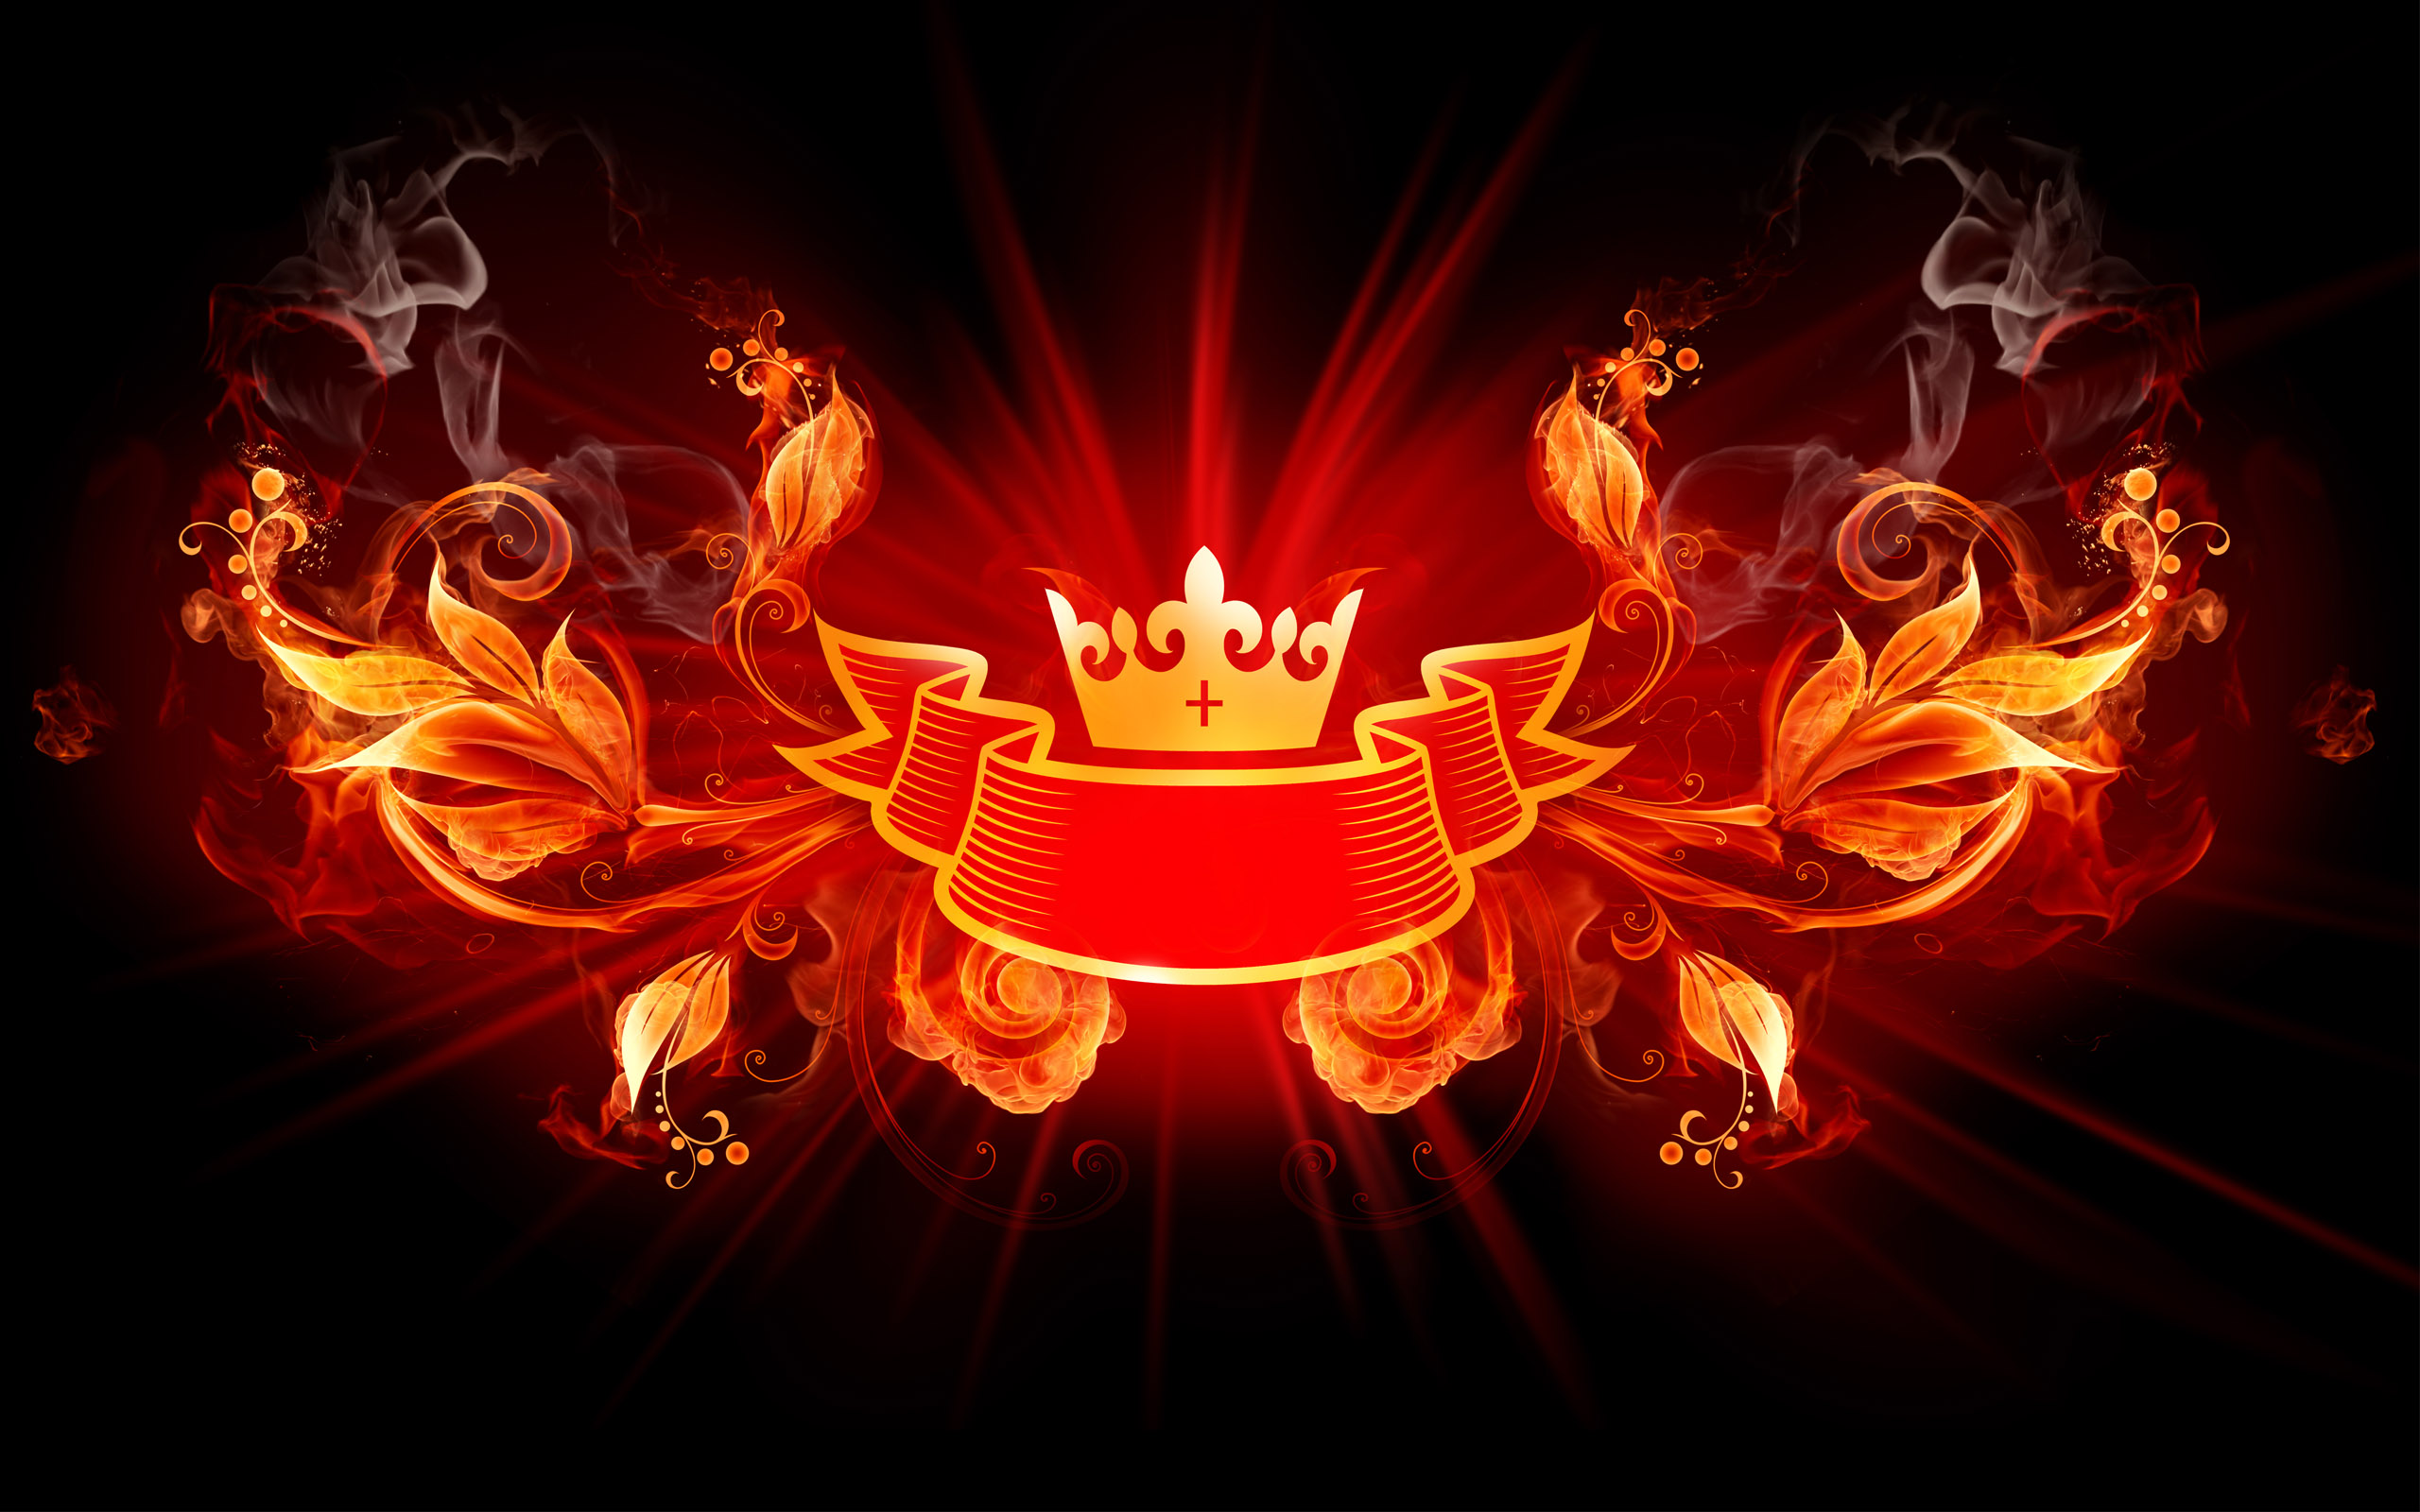 King of Fire Design HD Wide Wallpapers HD Wallpapers